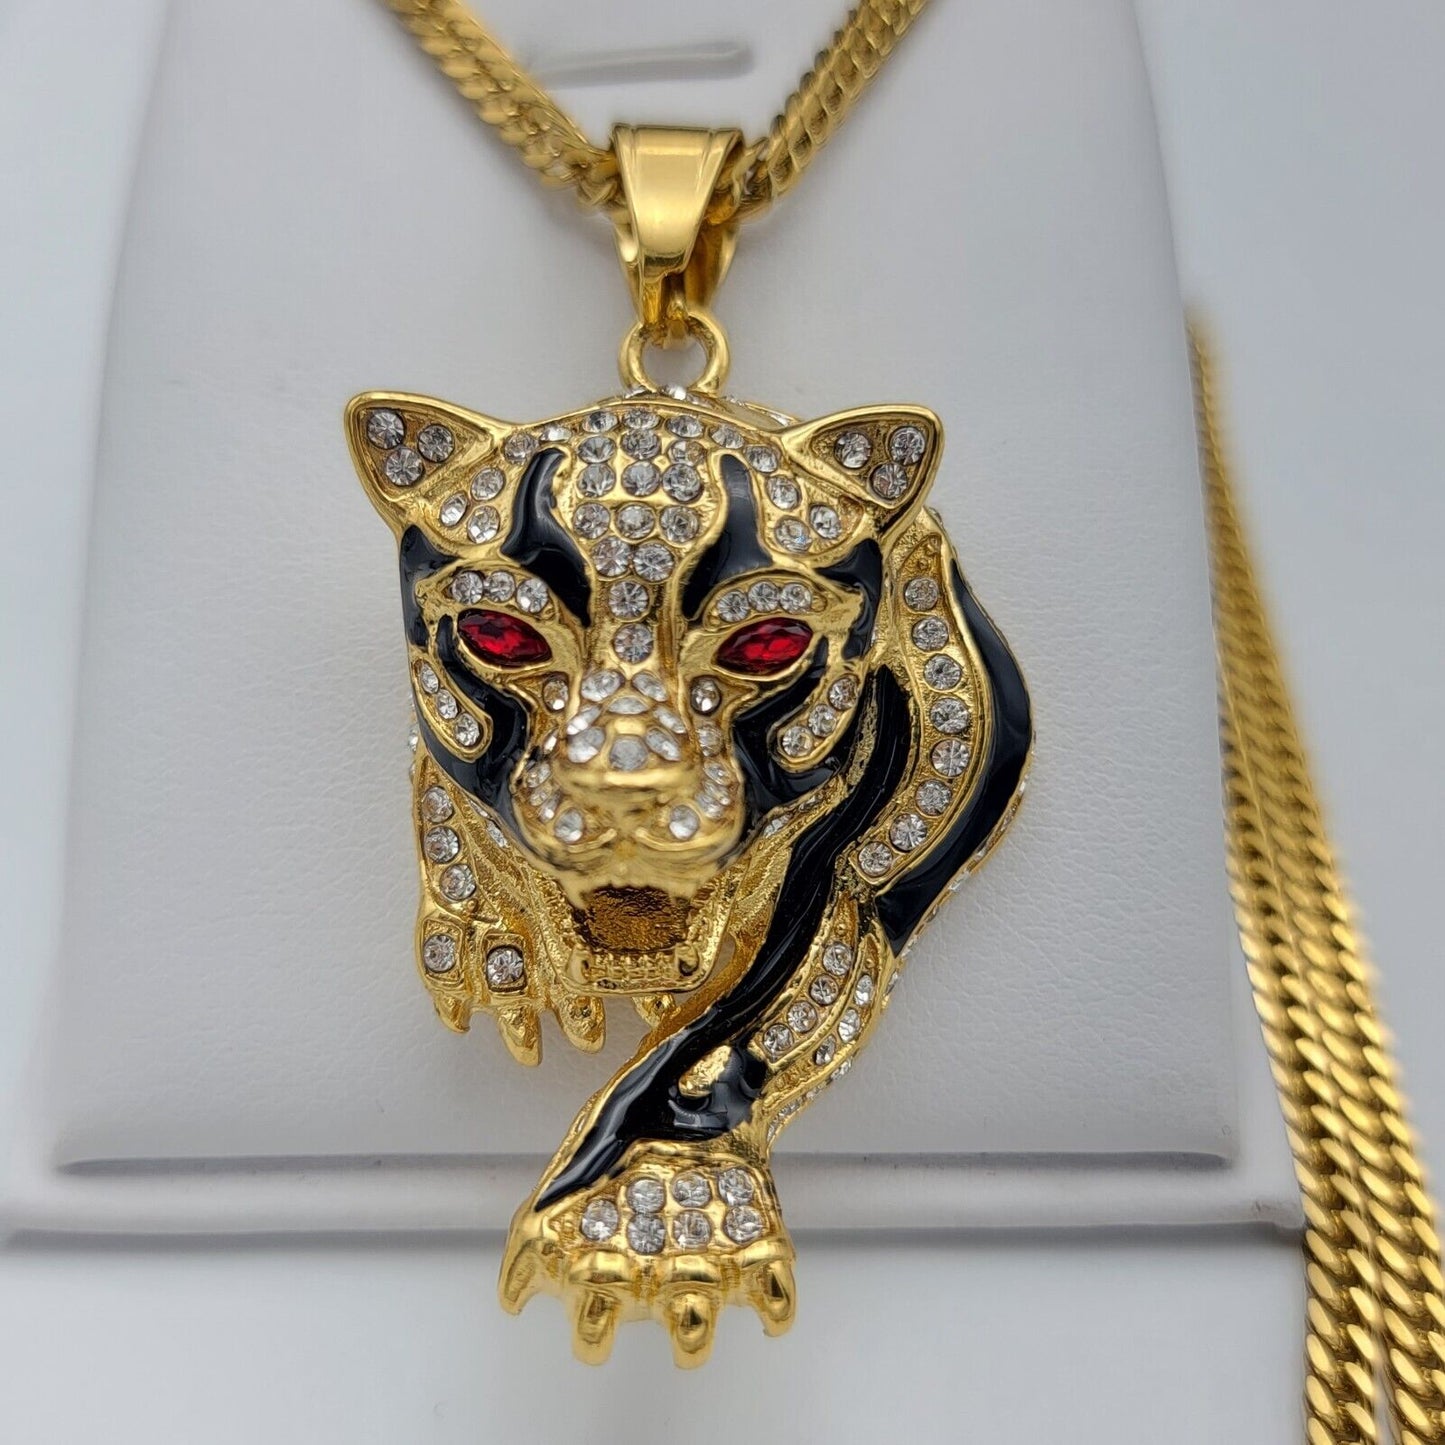 Necklaces - Stainless Steel Gold Plated. Prowl PANTHER Pendant & Chain.